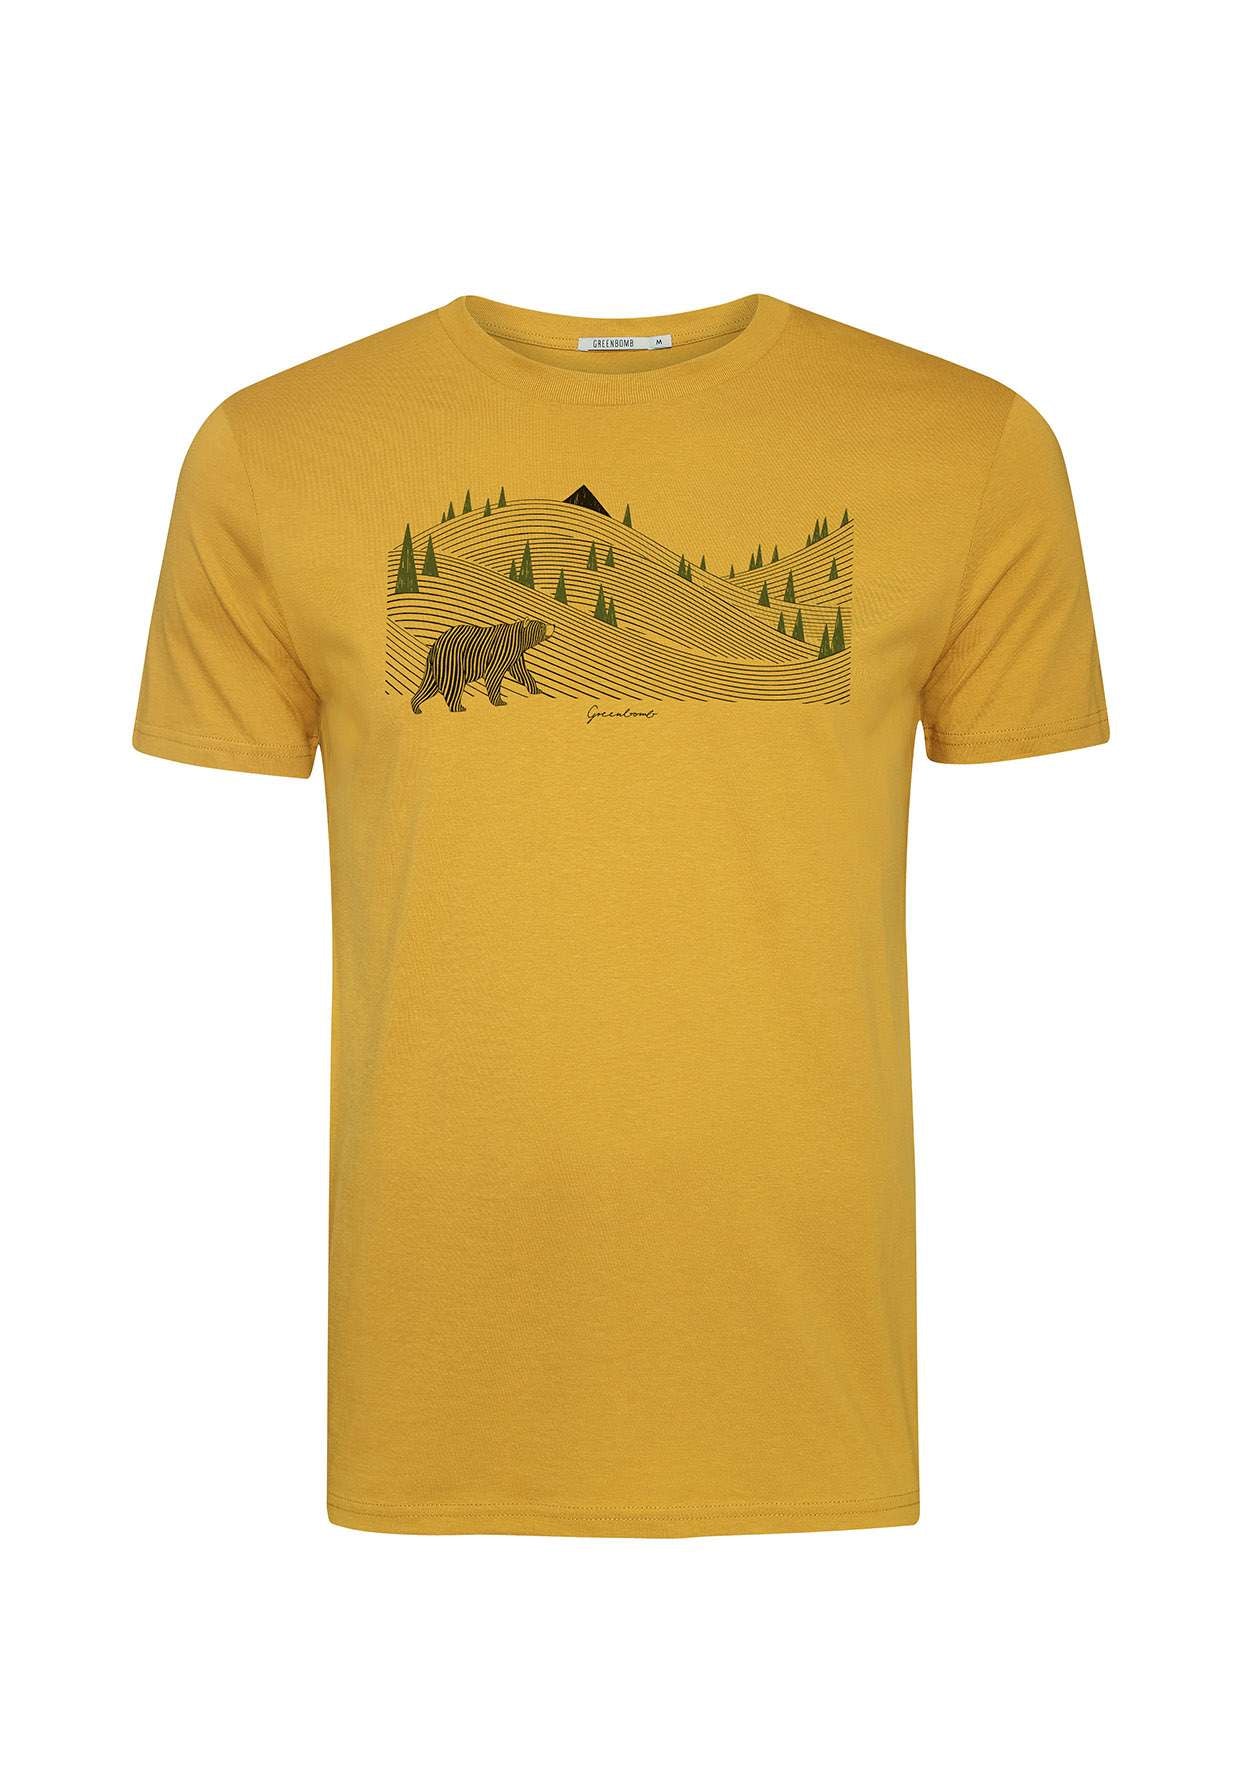 Greenbomb Animal Bearland Guide GOTS - Ochre-Mens-Ohh! By Gum - Shop Sustainable